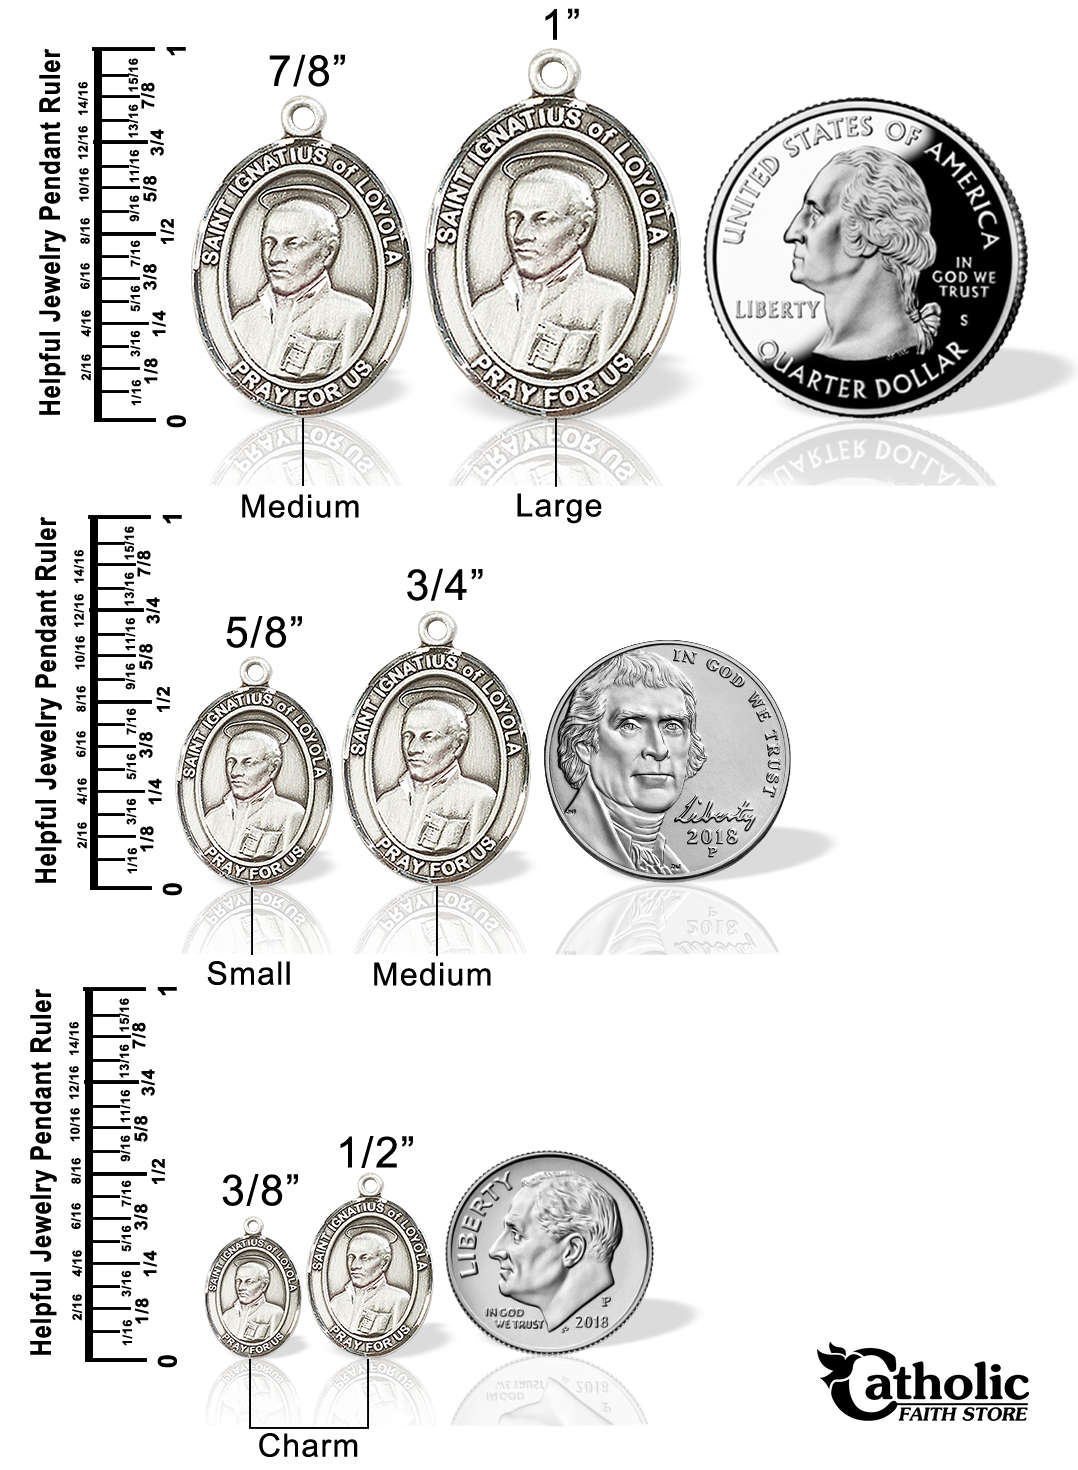 Compare pendants to quarter, nickel and dime